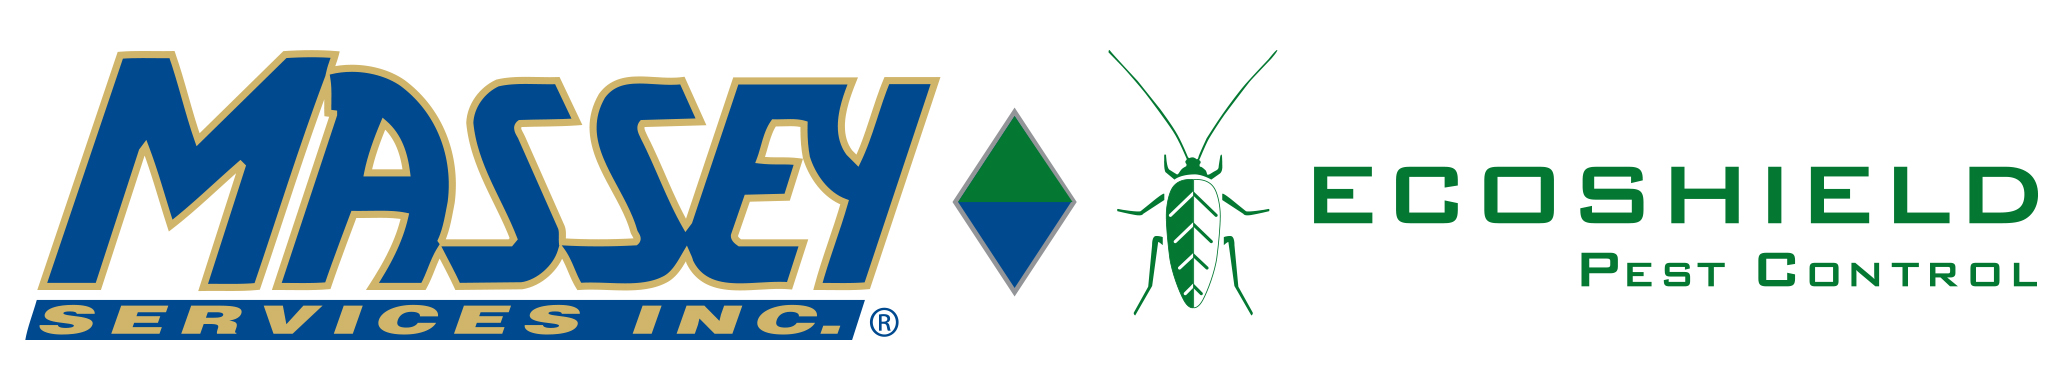 Massey Services Acquires ECOSHIELD Pest Control of Oklahoma City ...
